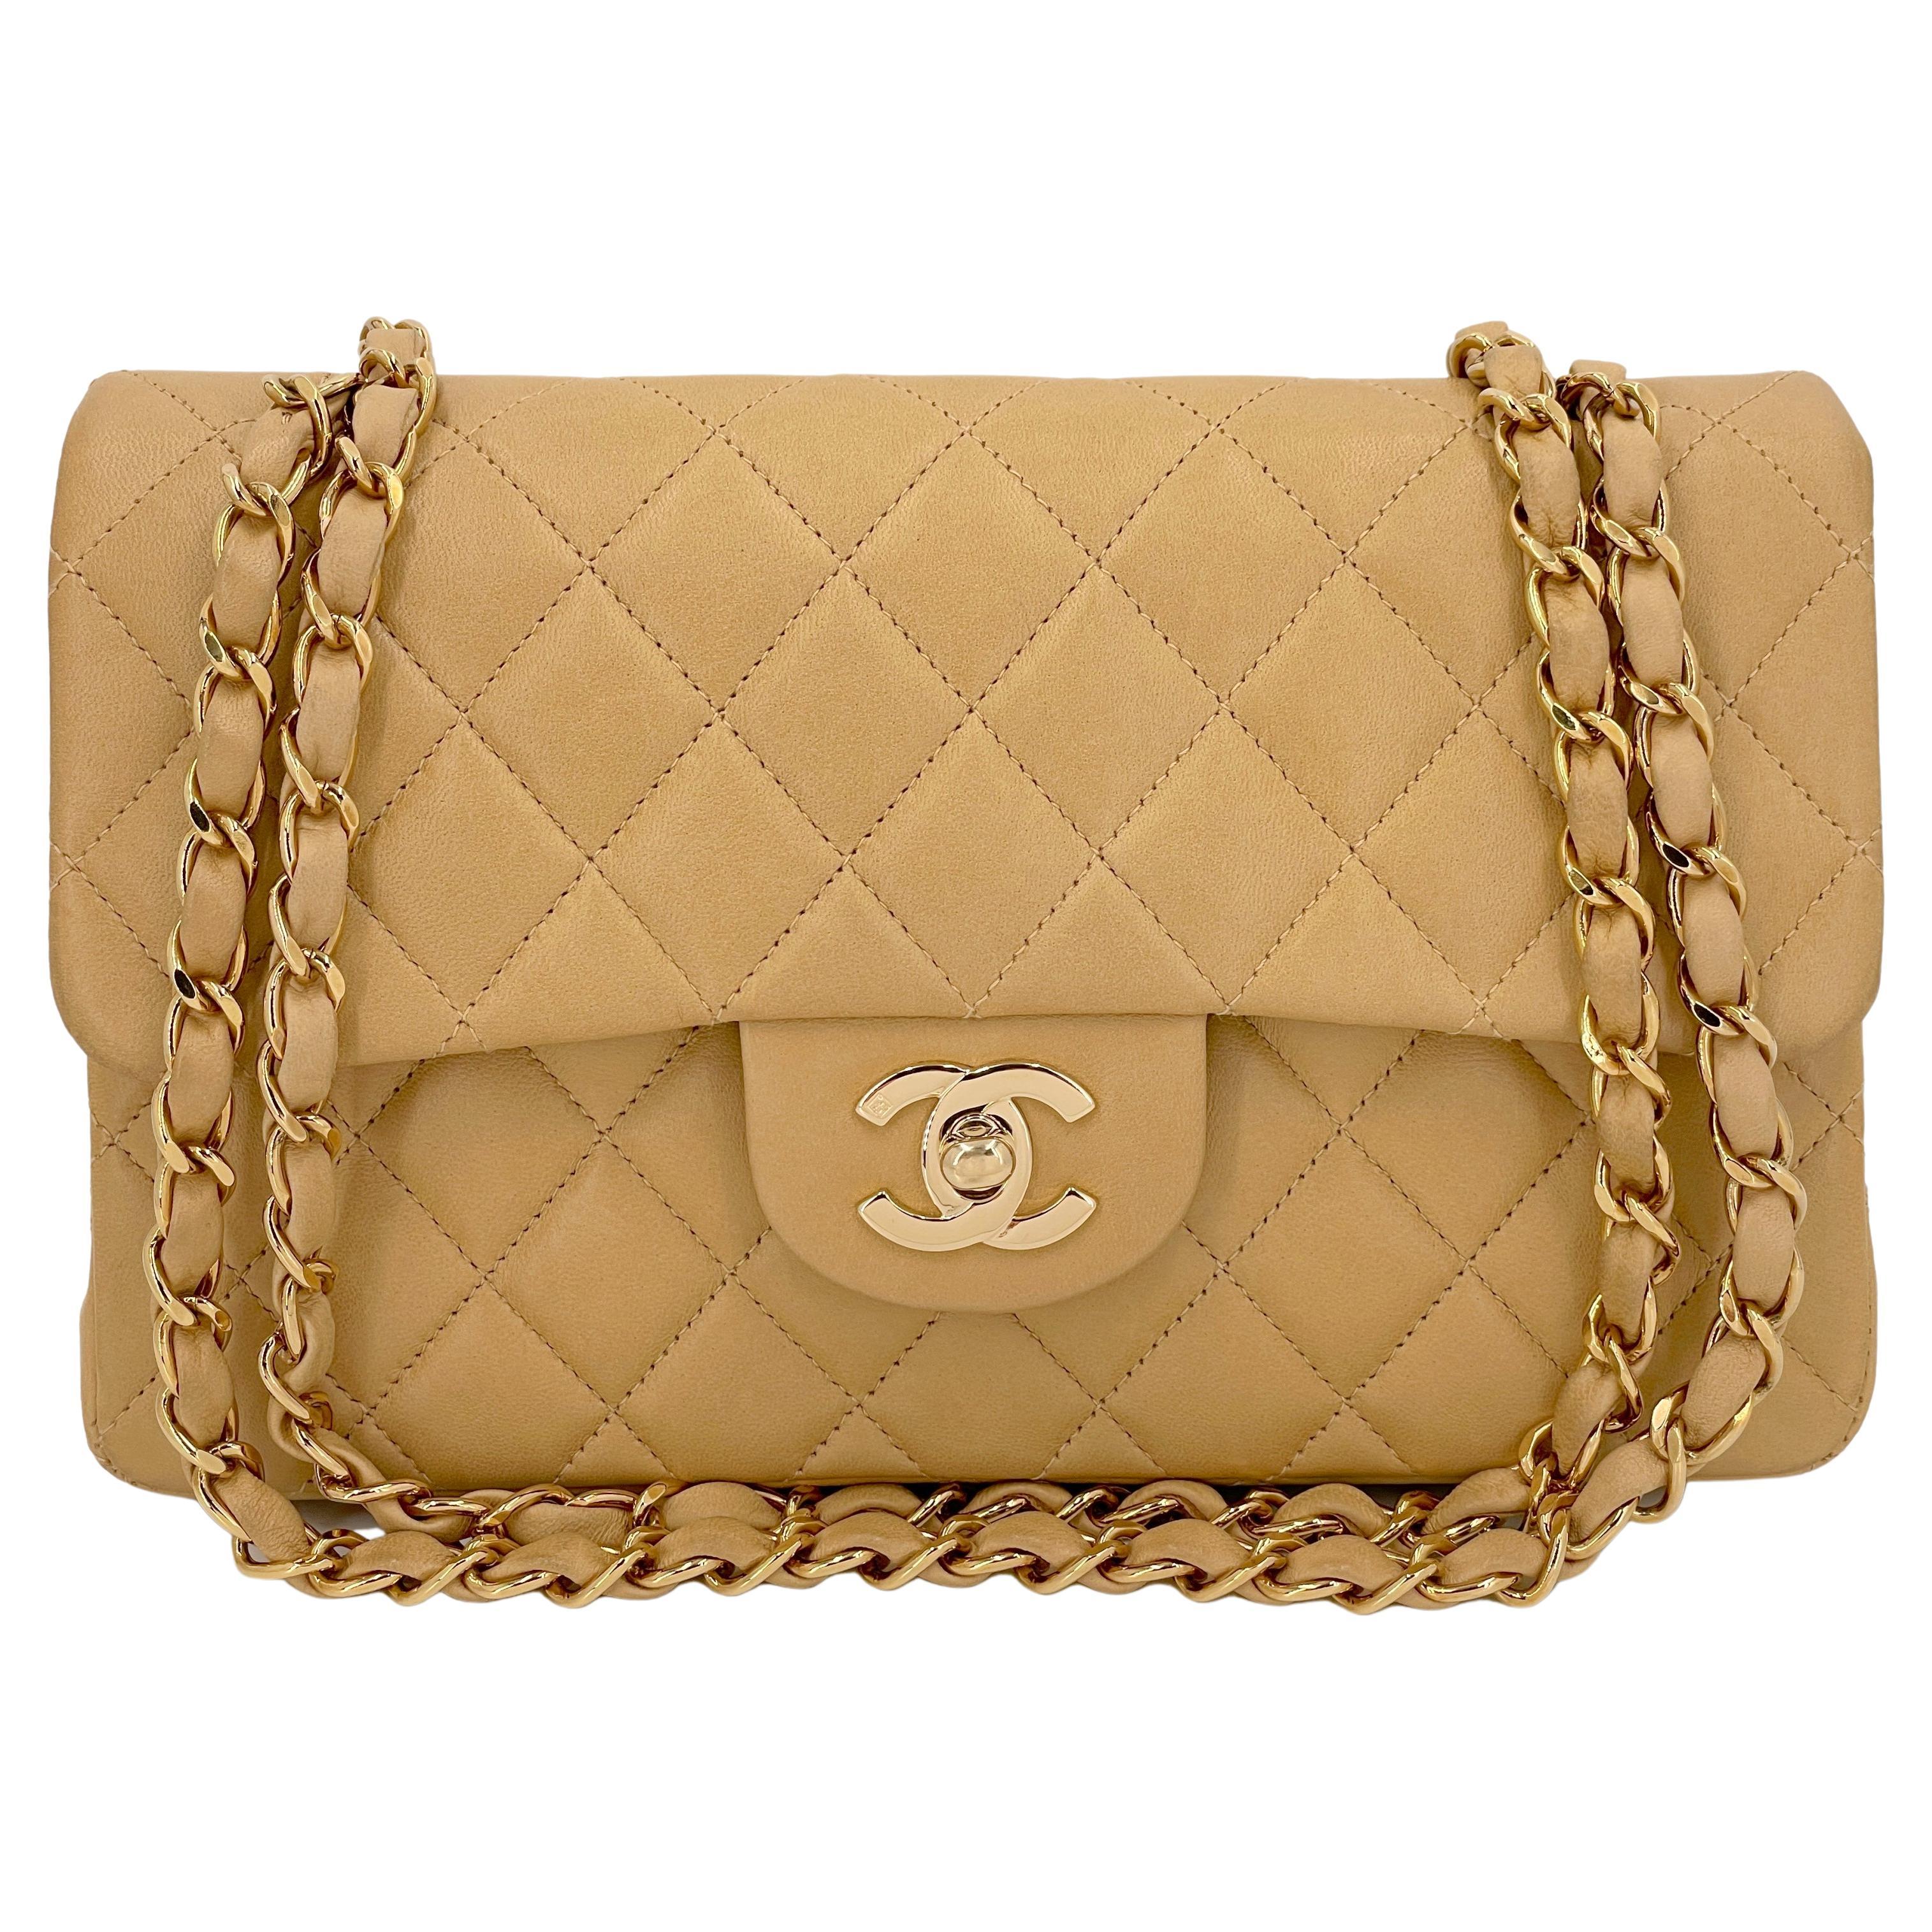 Chanel 2002 Vintage Beige Small Classic Double Flap Bag 24k GHW